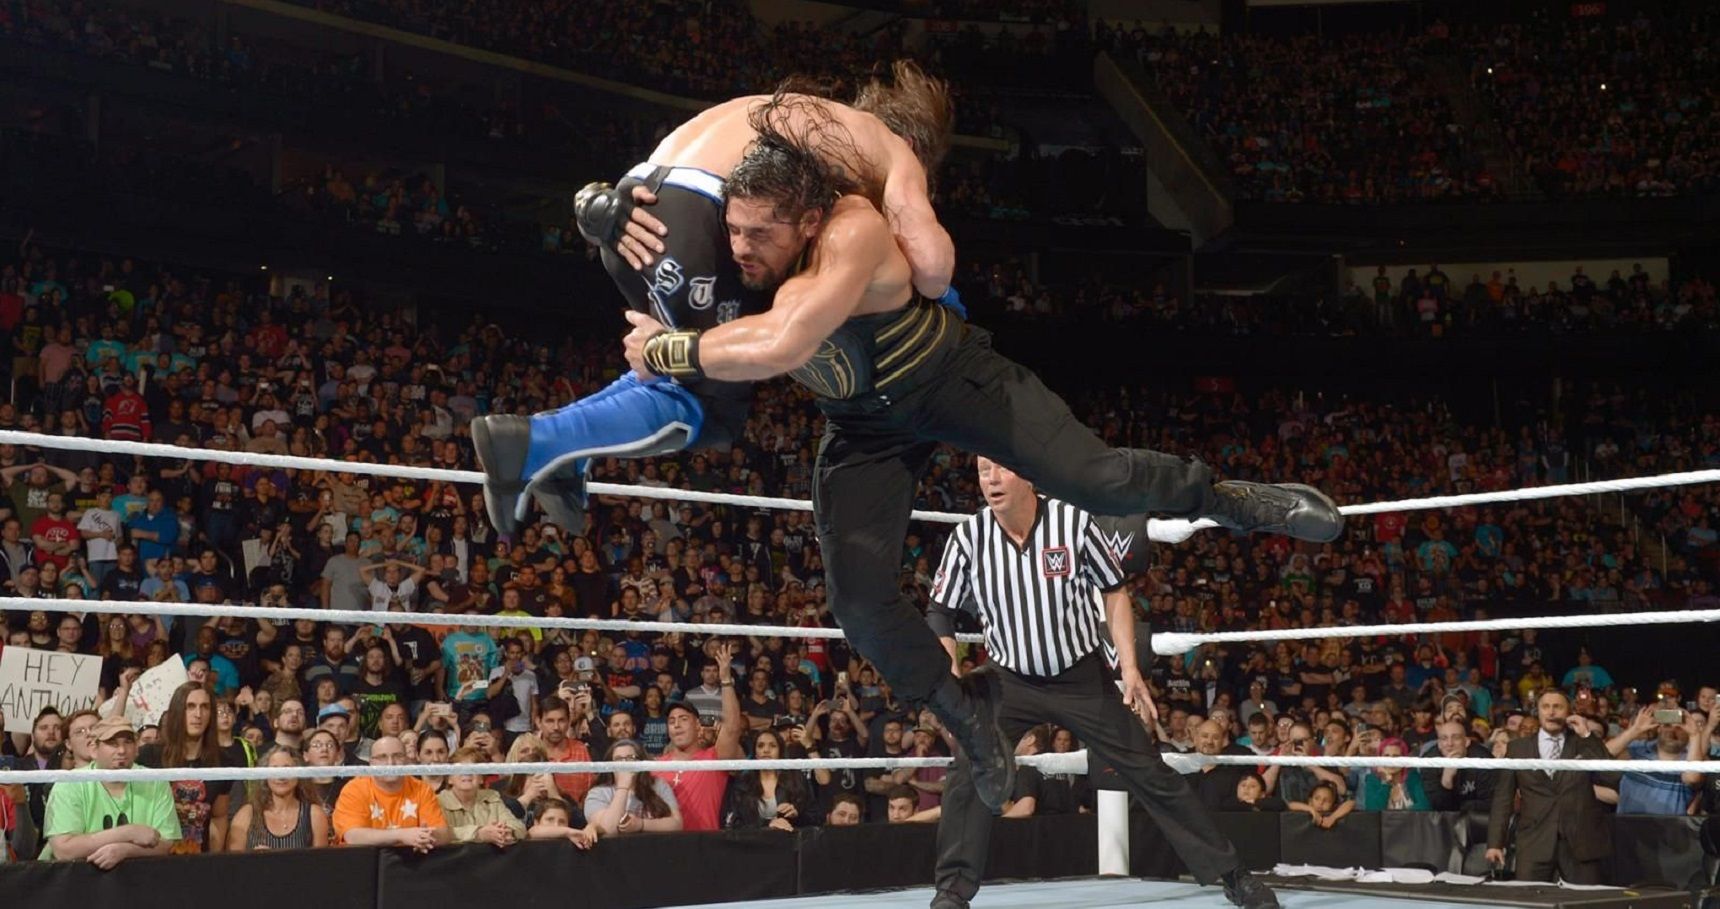 Top 15 Overused Wrestling Moves That We Don't Want To See Anymore